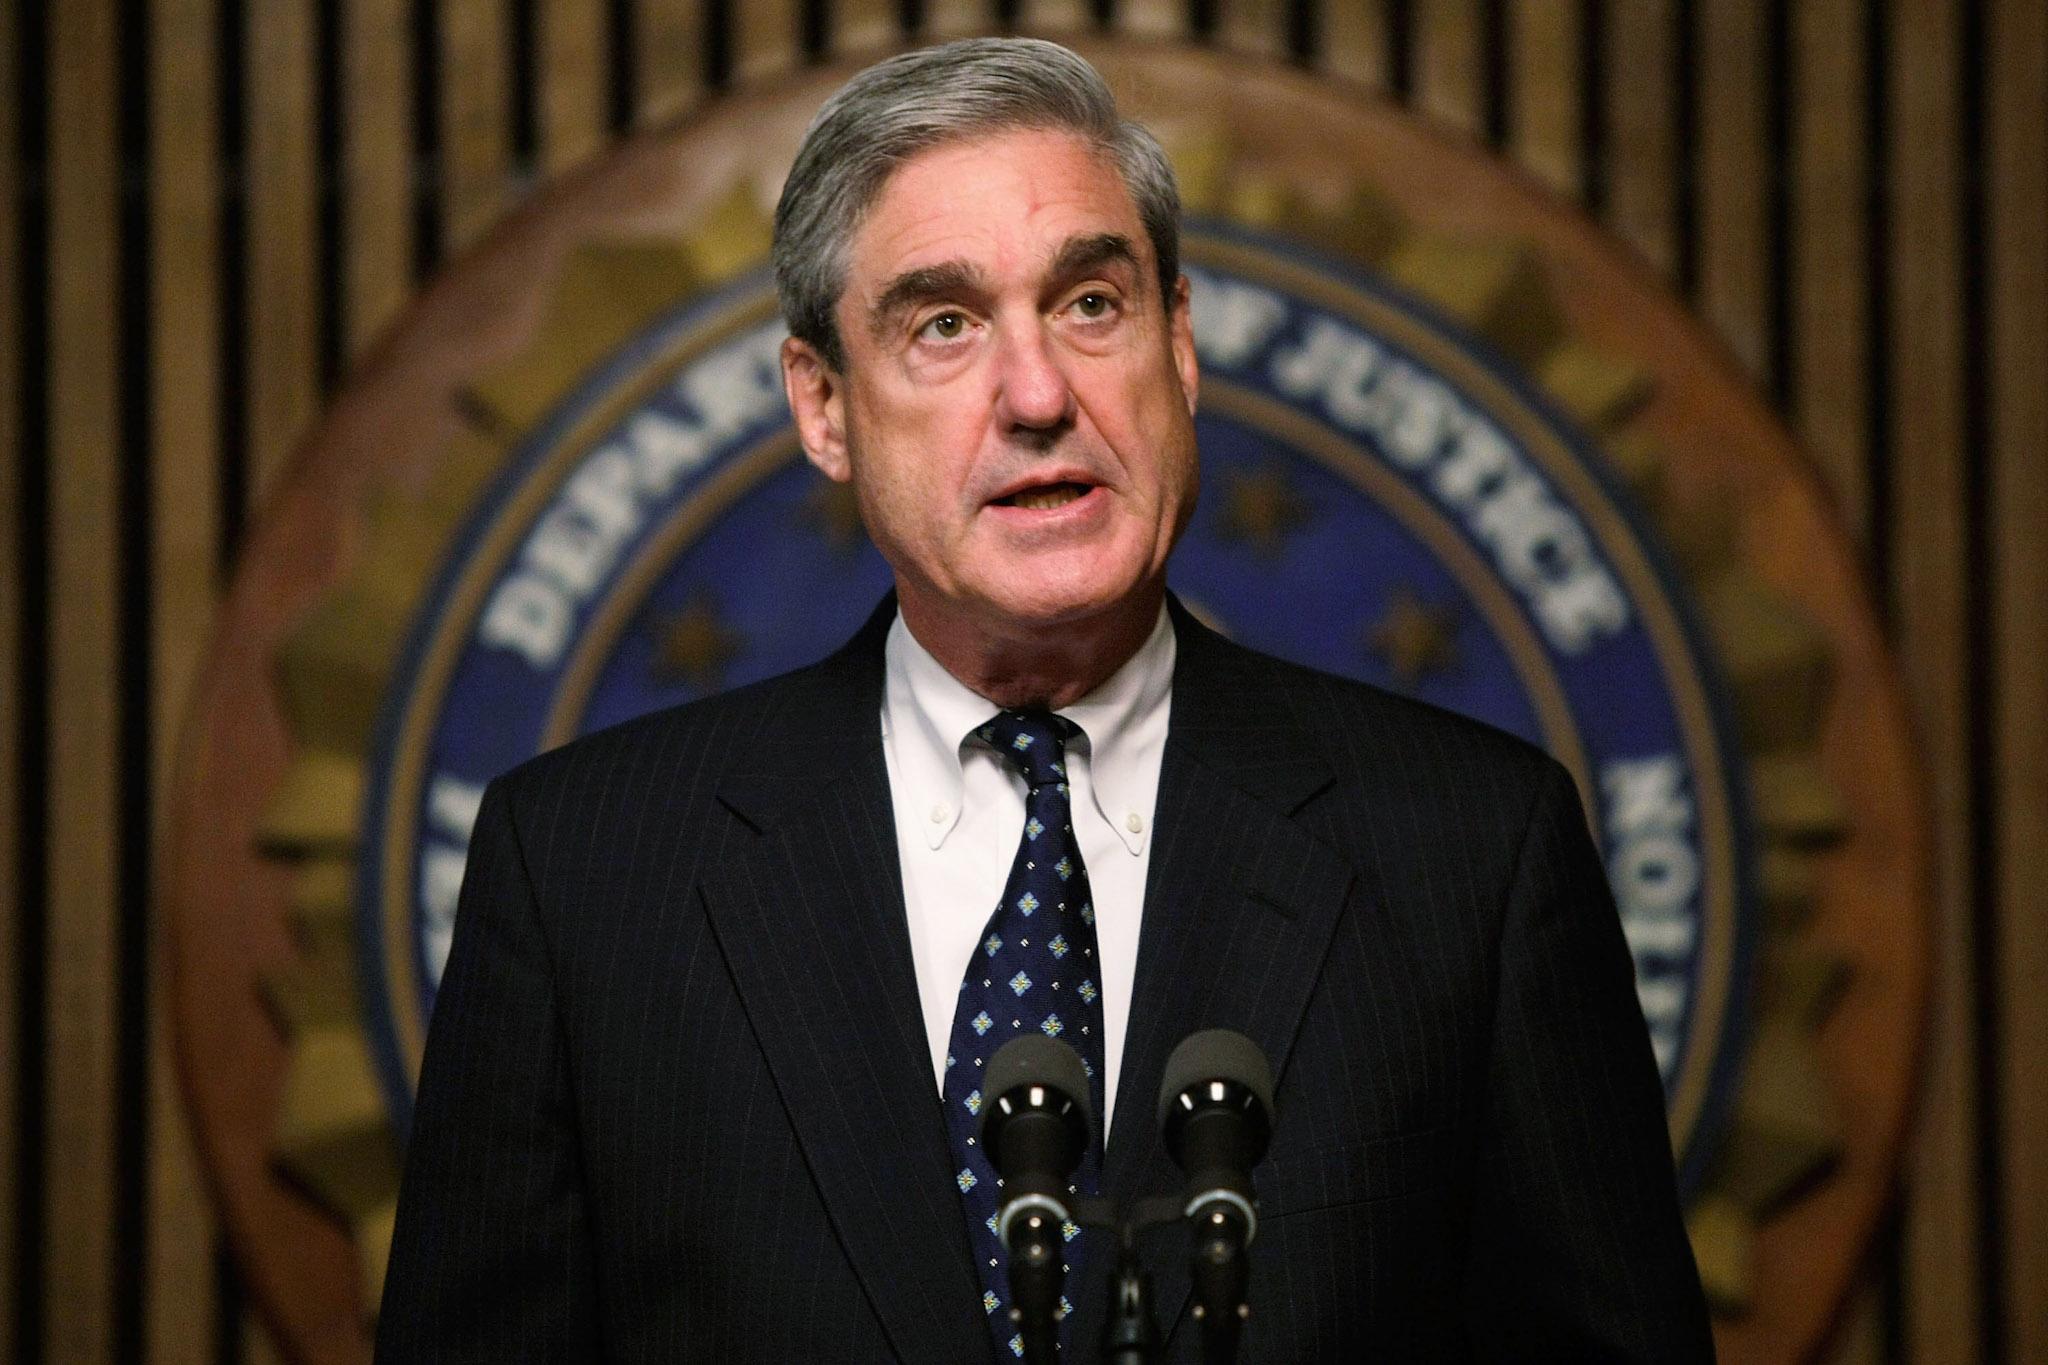 FBI Director Robert Mueller speaks during a news conference at the FBI headquarters